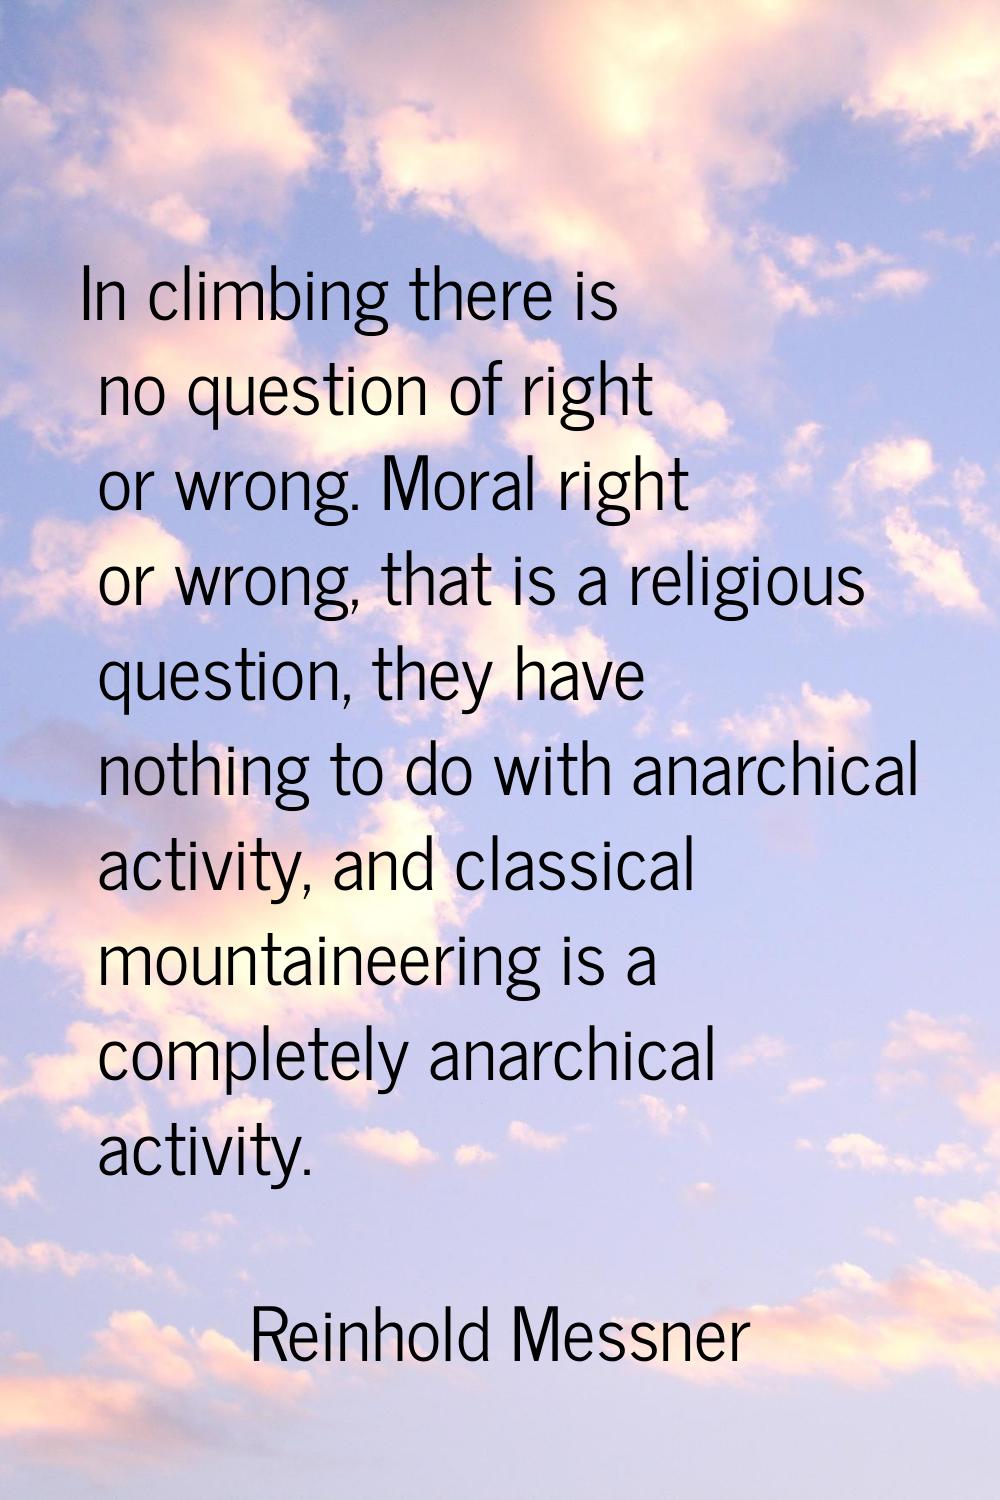 In climbing there is no question of right or wrong. Moral right or wrong, that is a religious quest